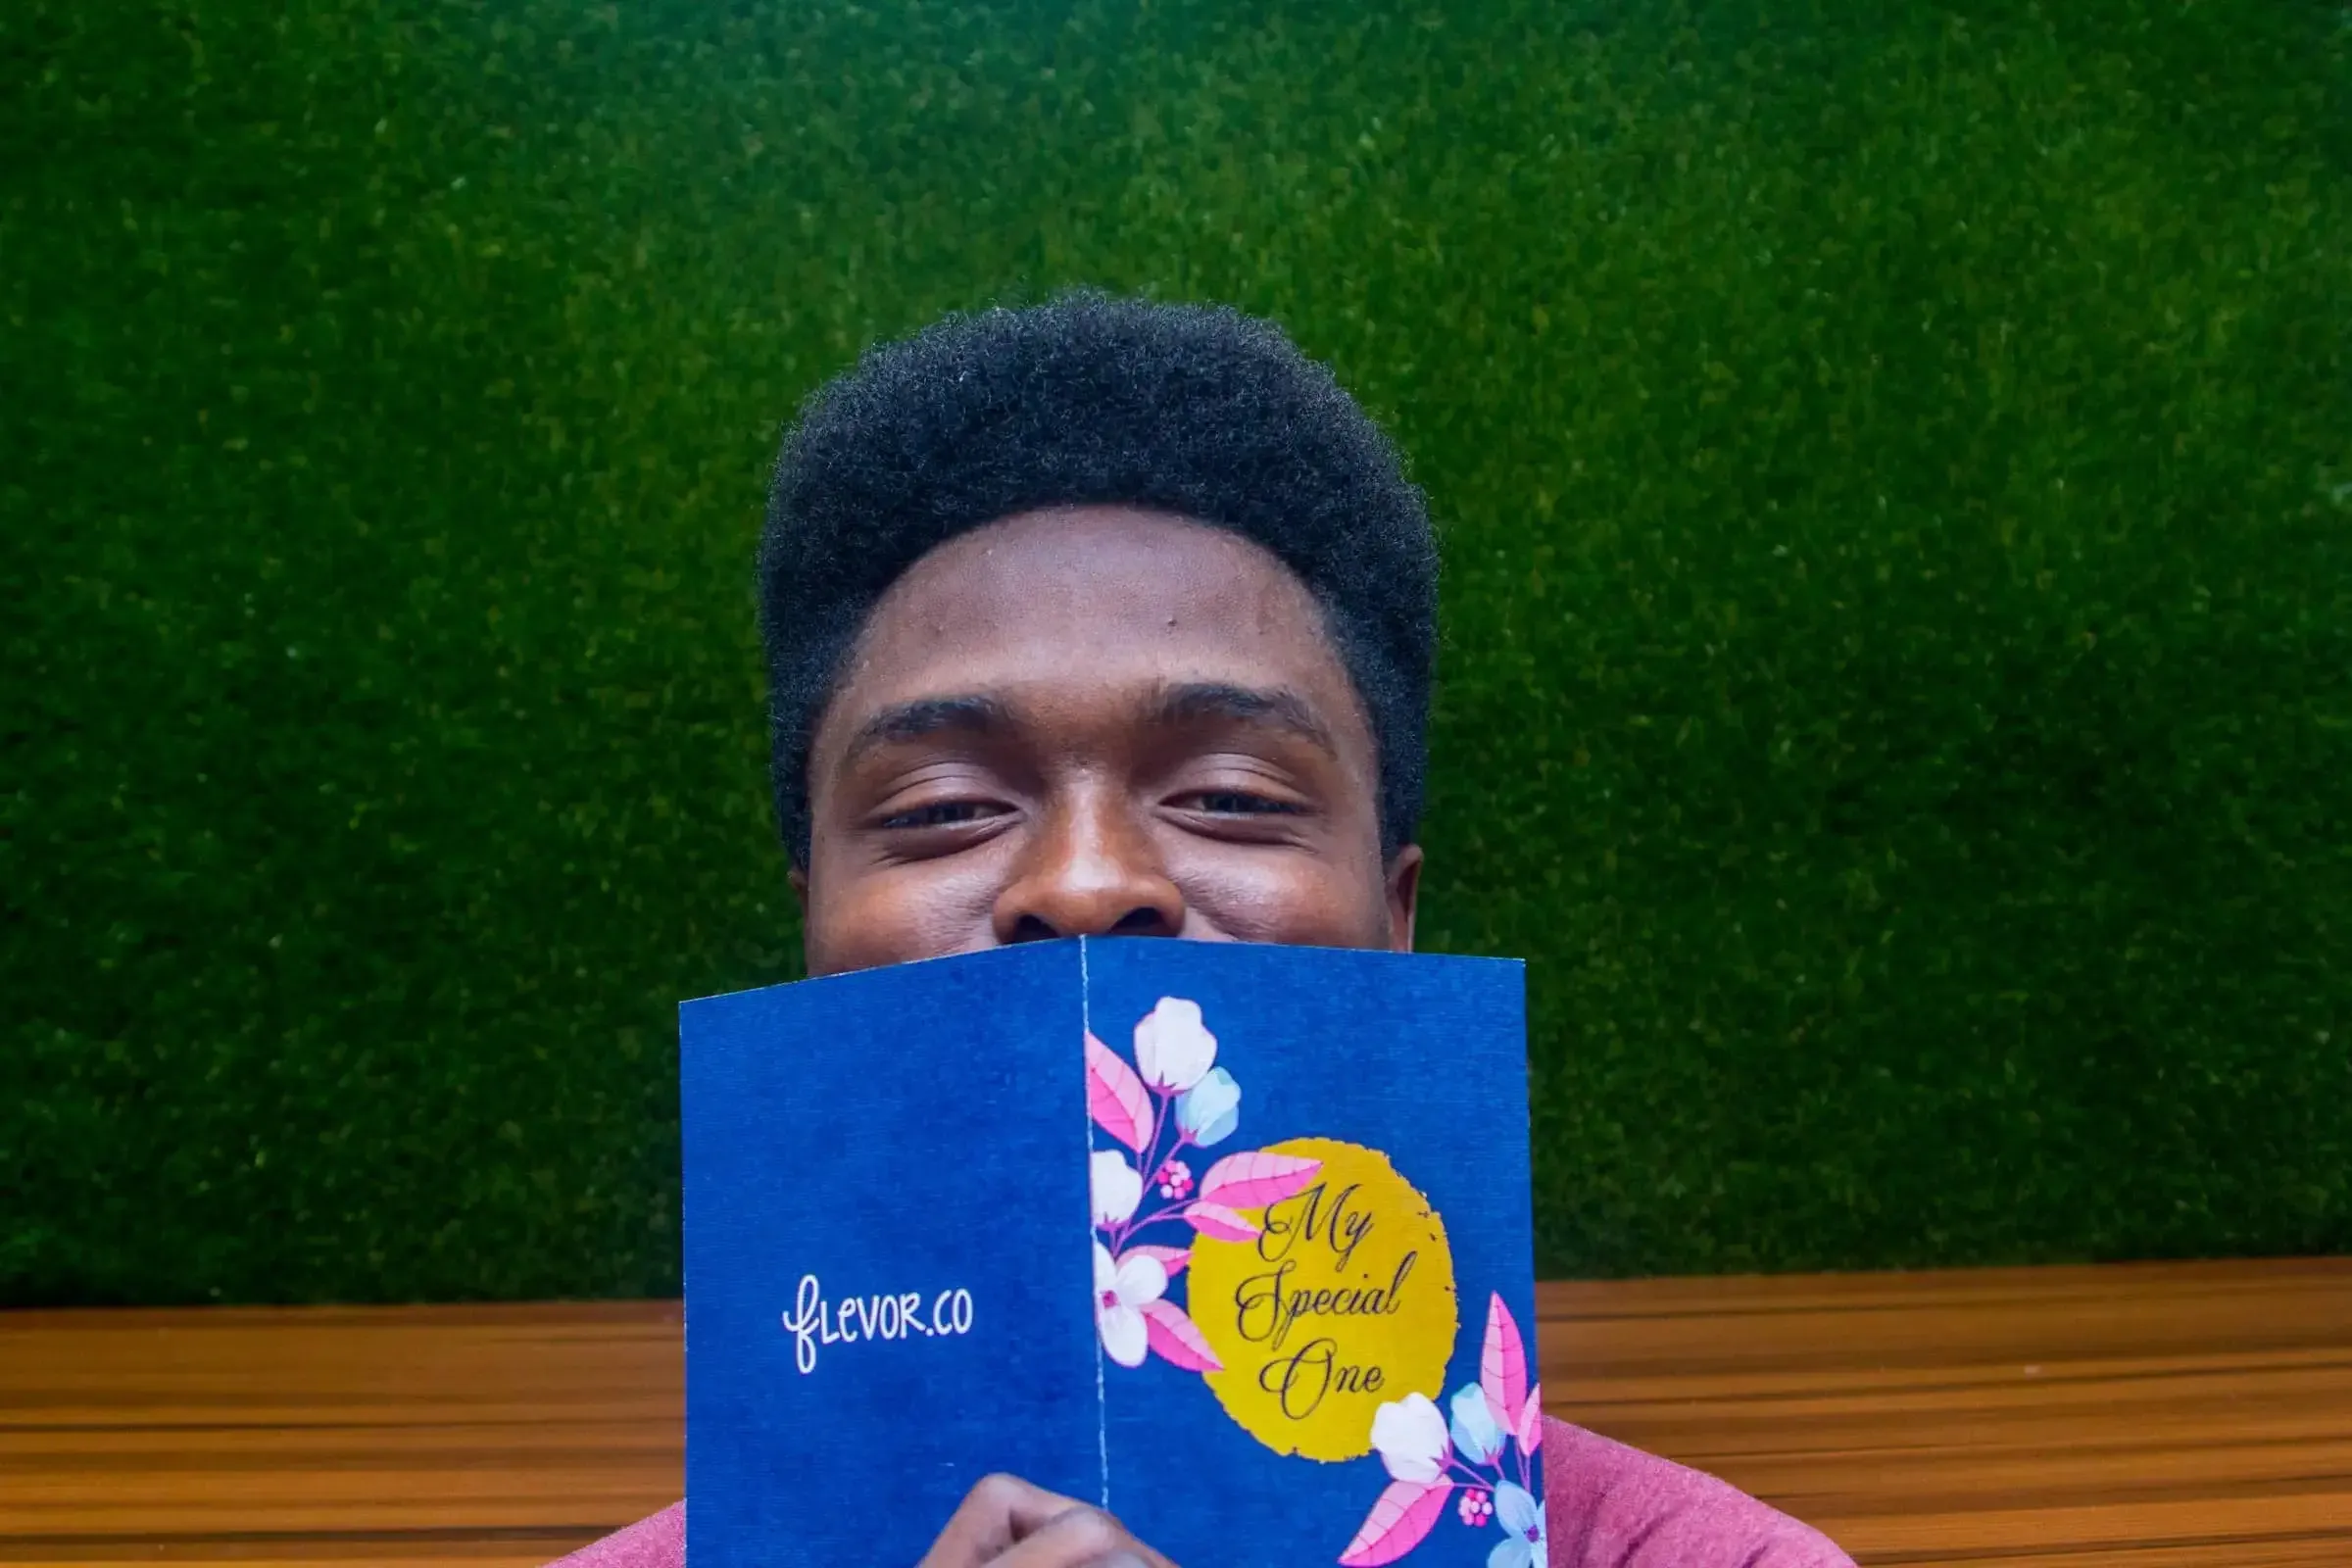 a joyful man holding a book with a vibrant cover